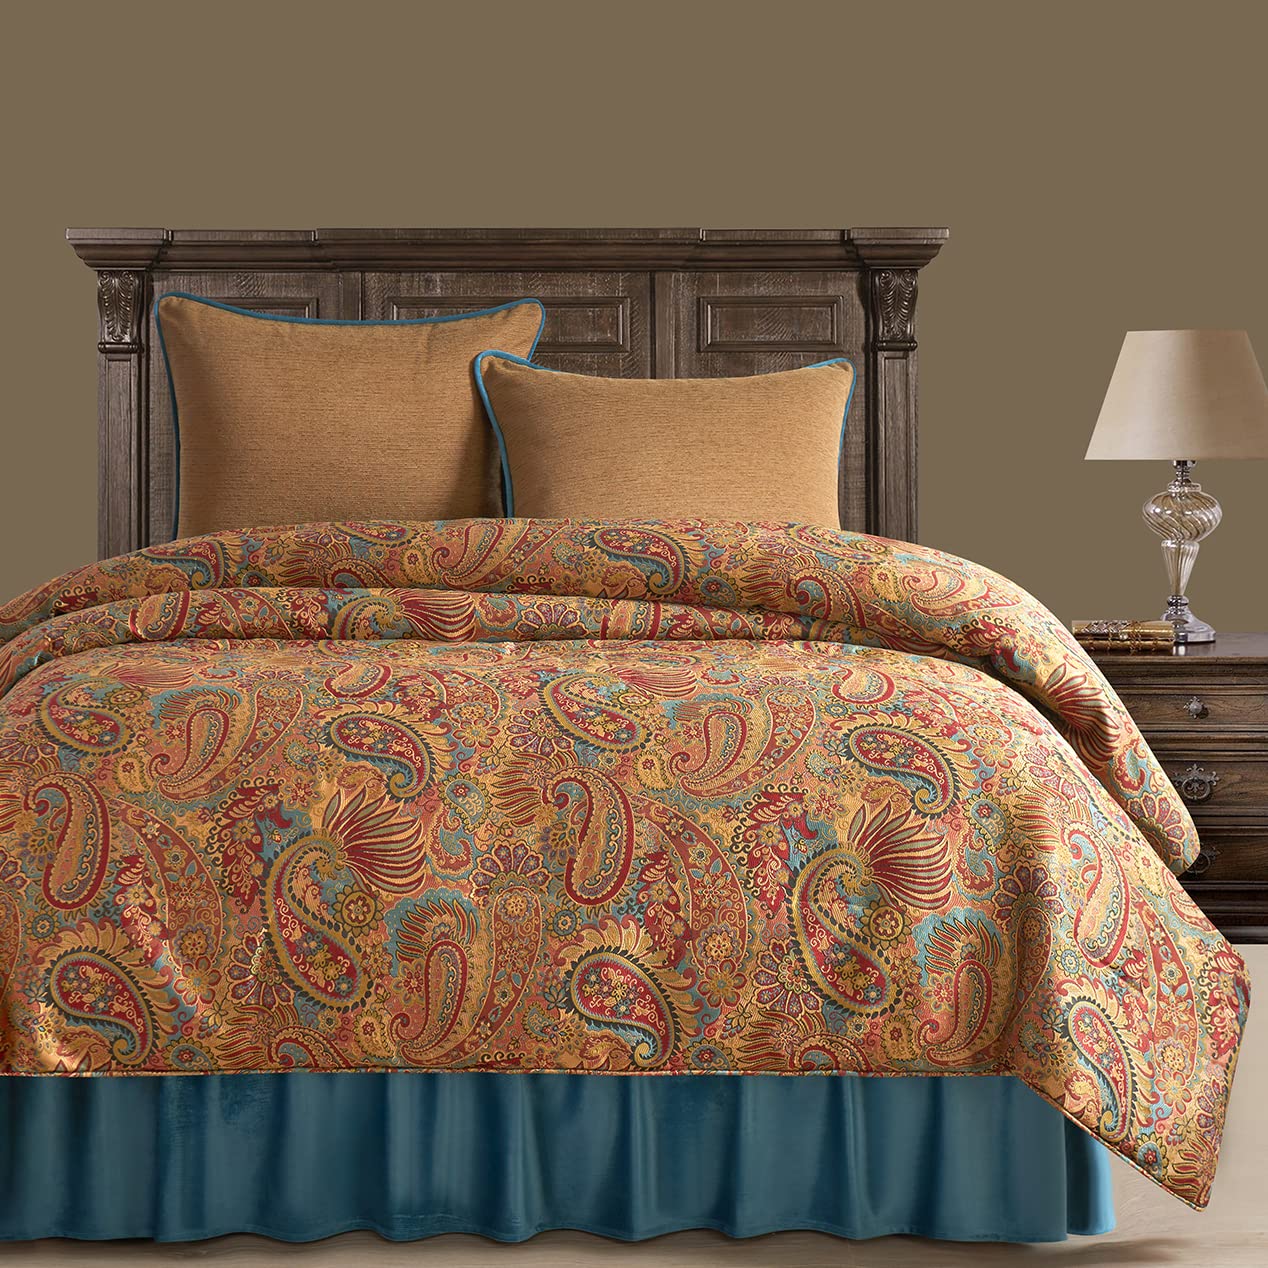 Paseo Road by HiEnd Accents San Angelo 4 Piece Comforter Set, Super King, Paisley Pattern, Teal Bed Skirt, Western Rustic Farmhouse Style Bedding Set, 1 Comforter, 1 Bedskirt, 2 Pillow Shams